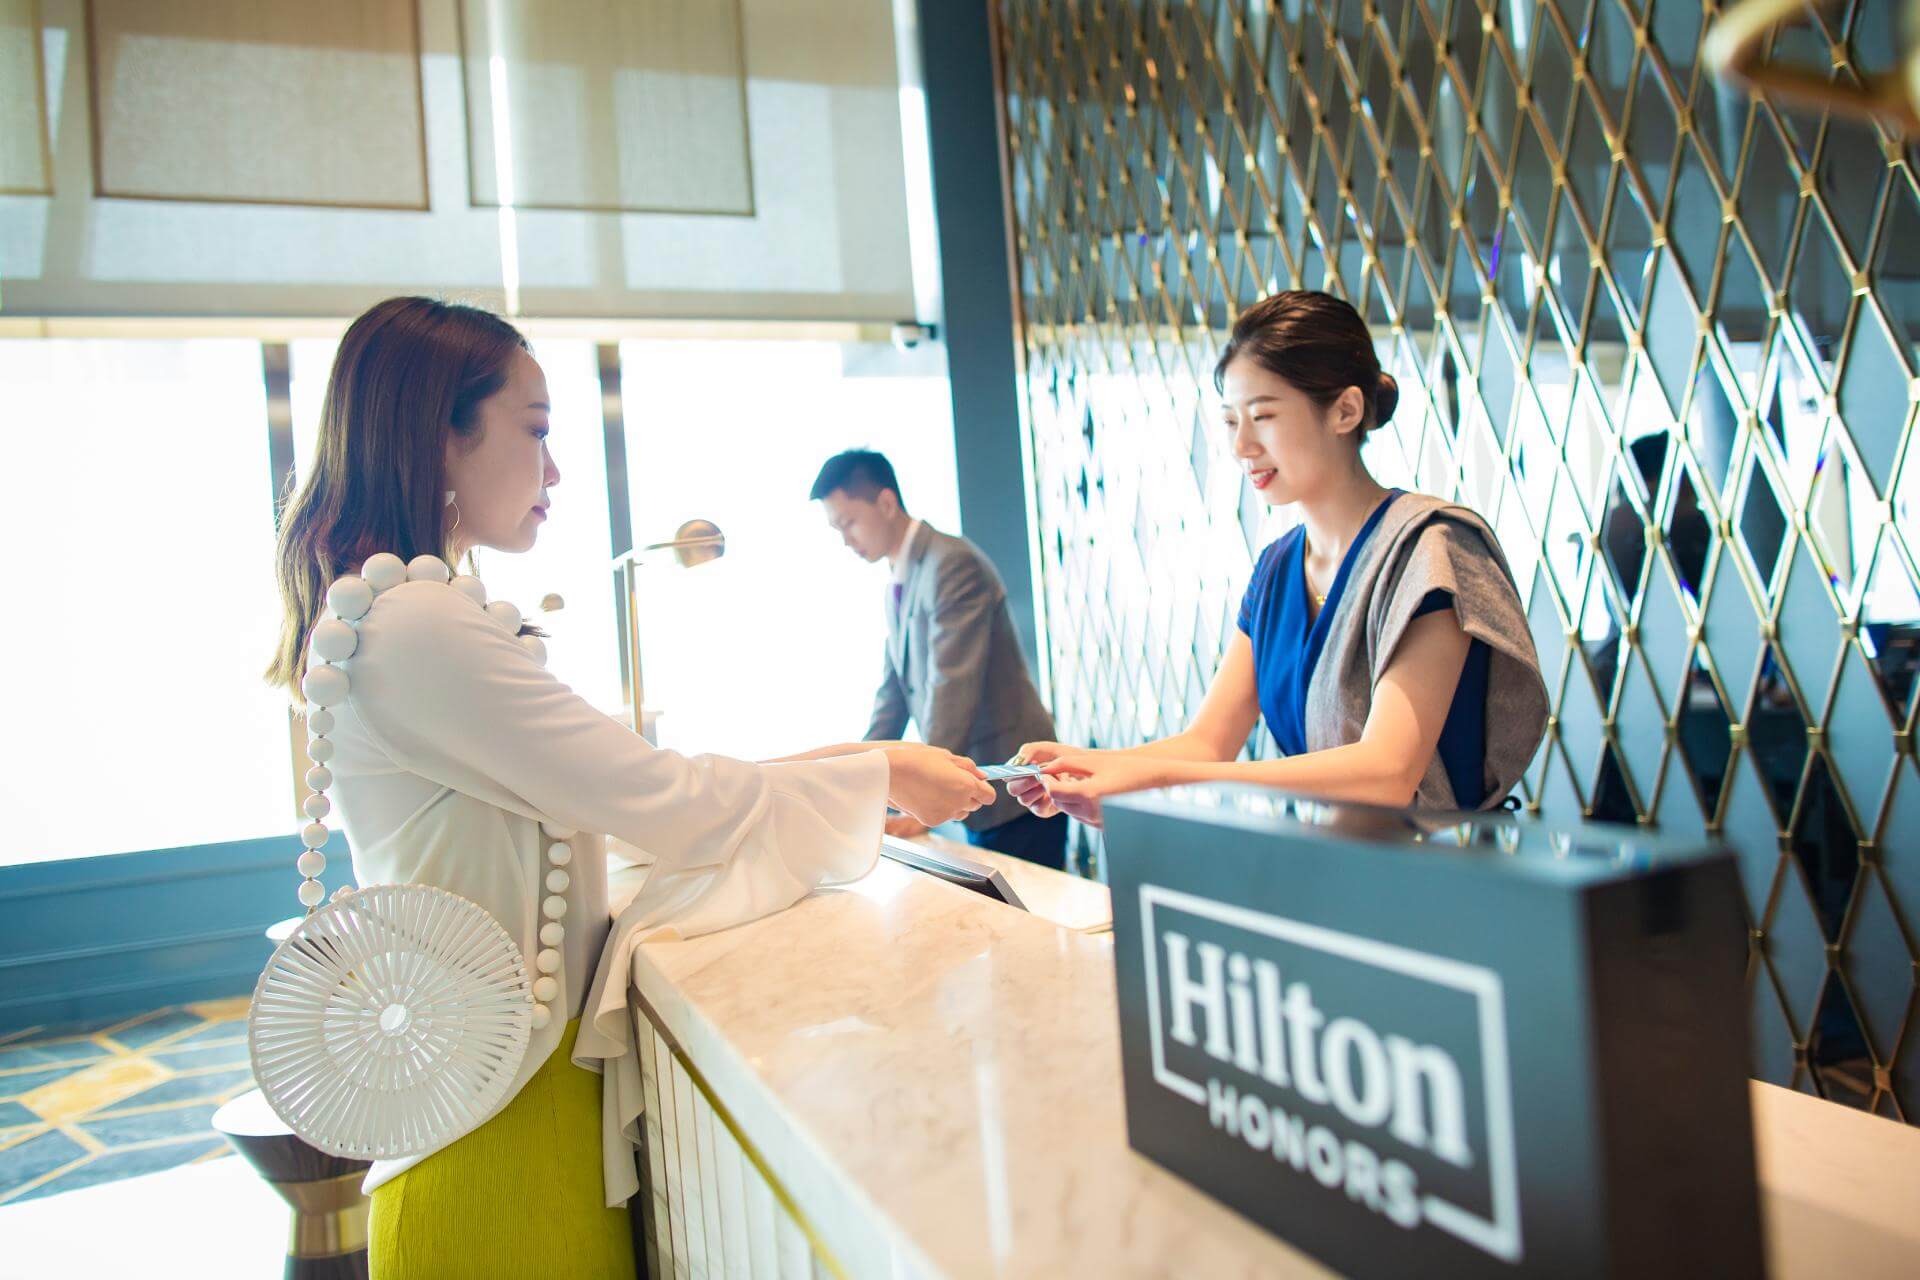 A women interacting with a Hilton Honors location